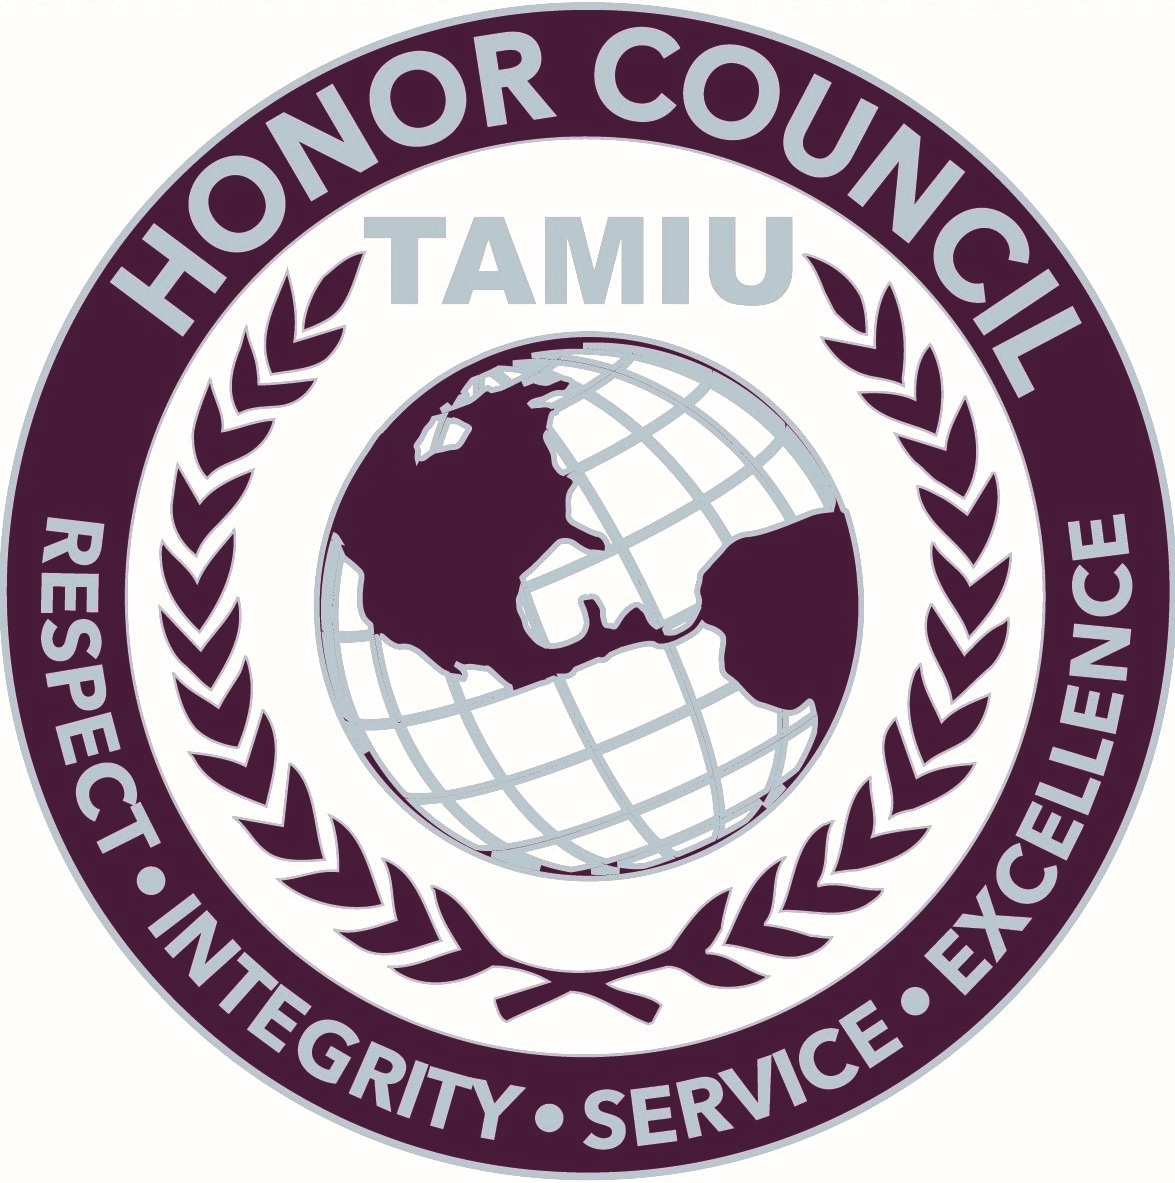 New Honor Council Seal 